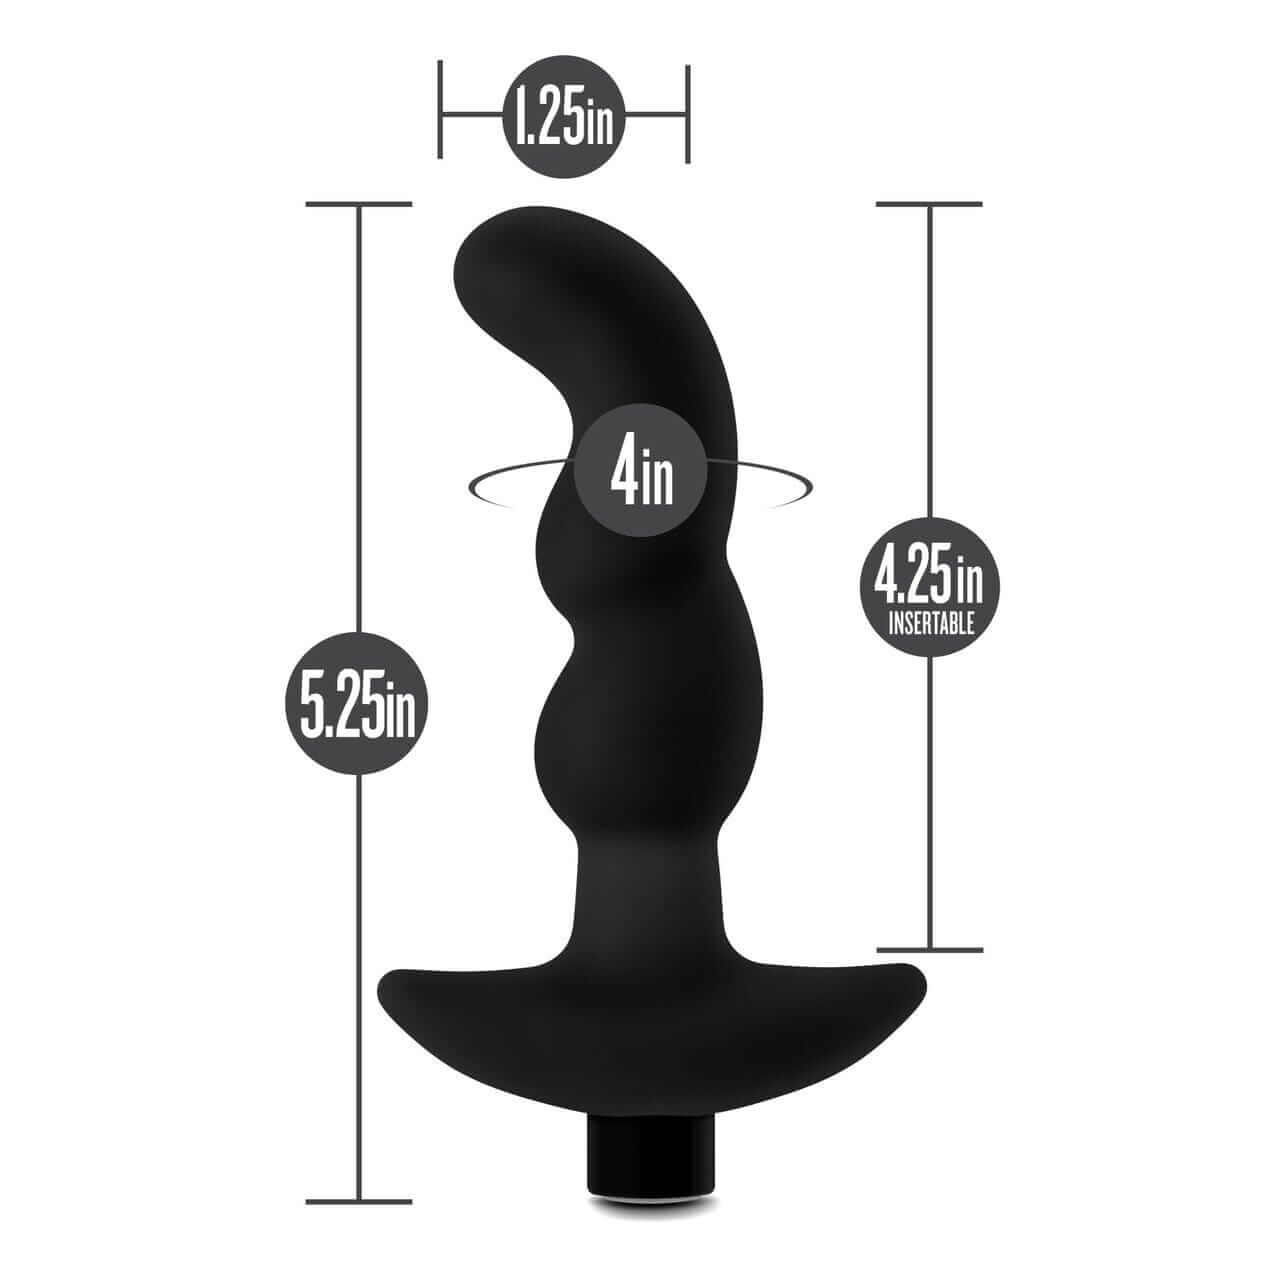 Silicone Vibrating Prostate Massager 03 - Black - Thorn & Feather Sex Toy Canada